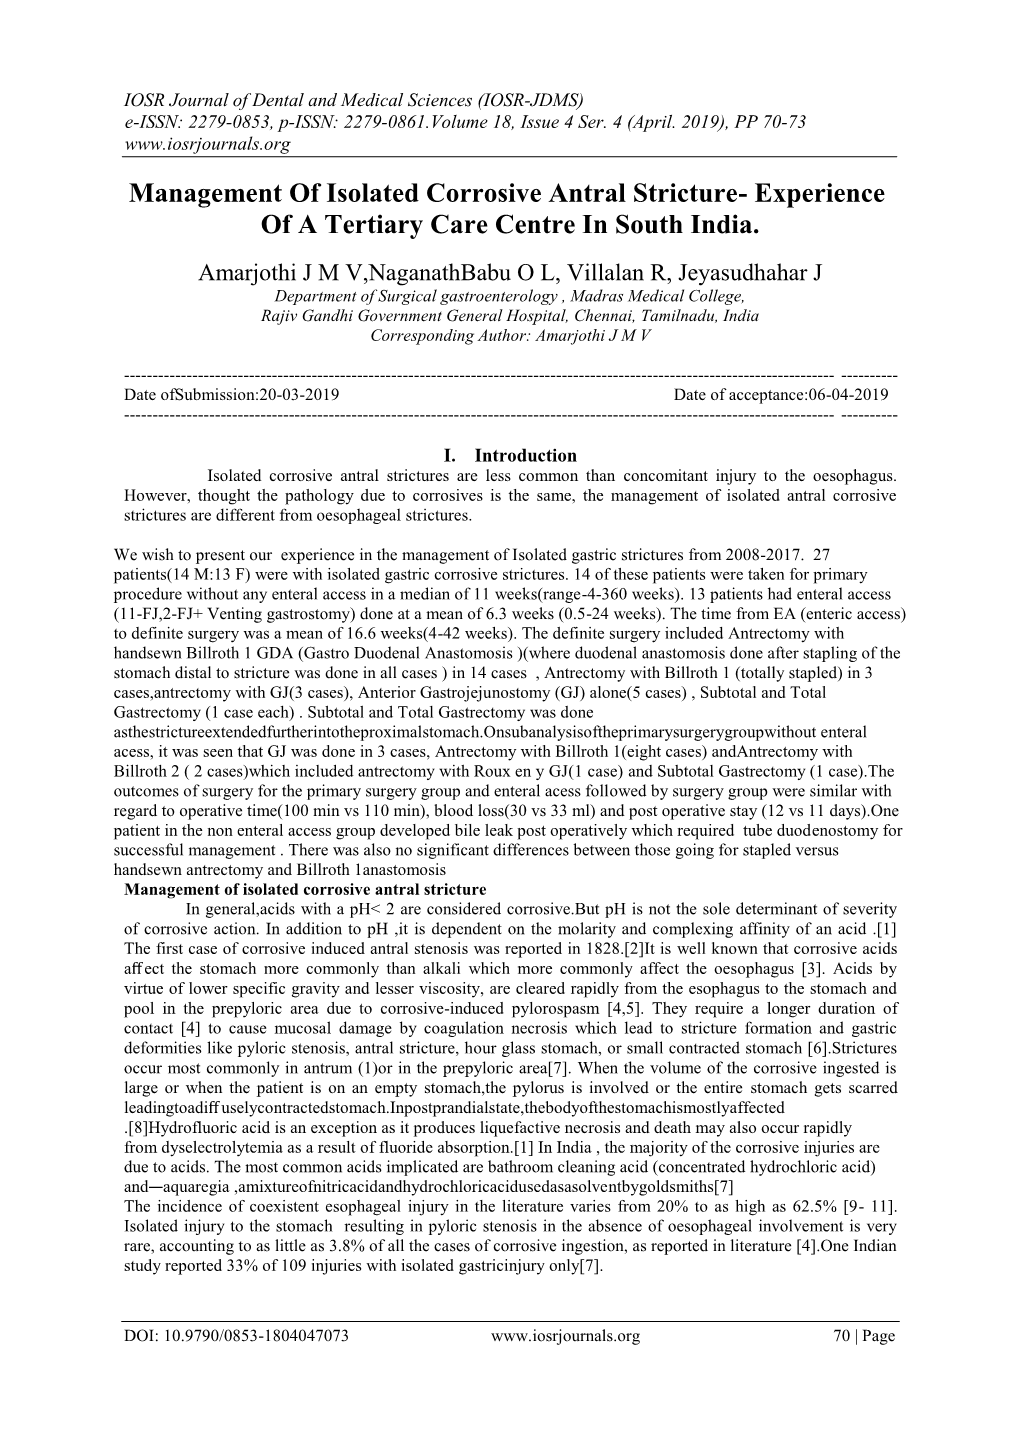 Management of Isolated Corrosive Antral Stricture- Experience of a Tertiary Care Centre in South India